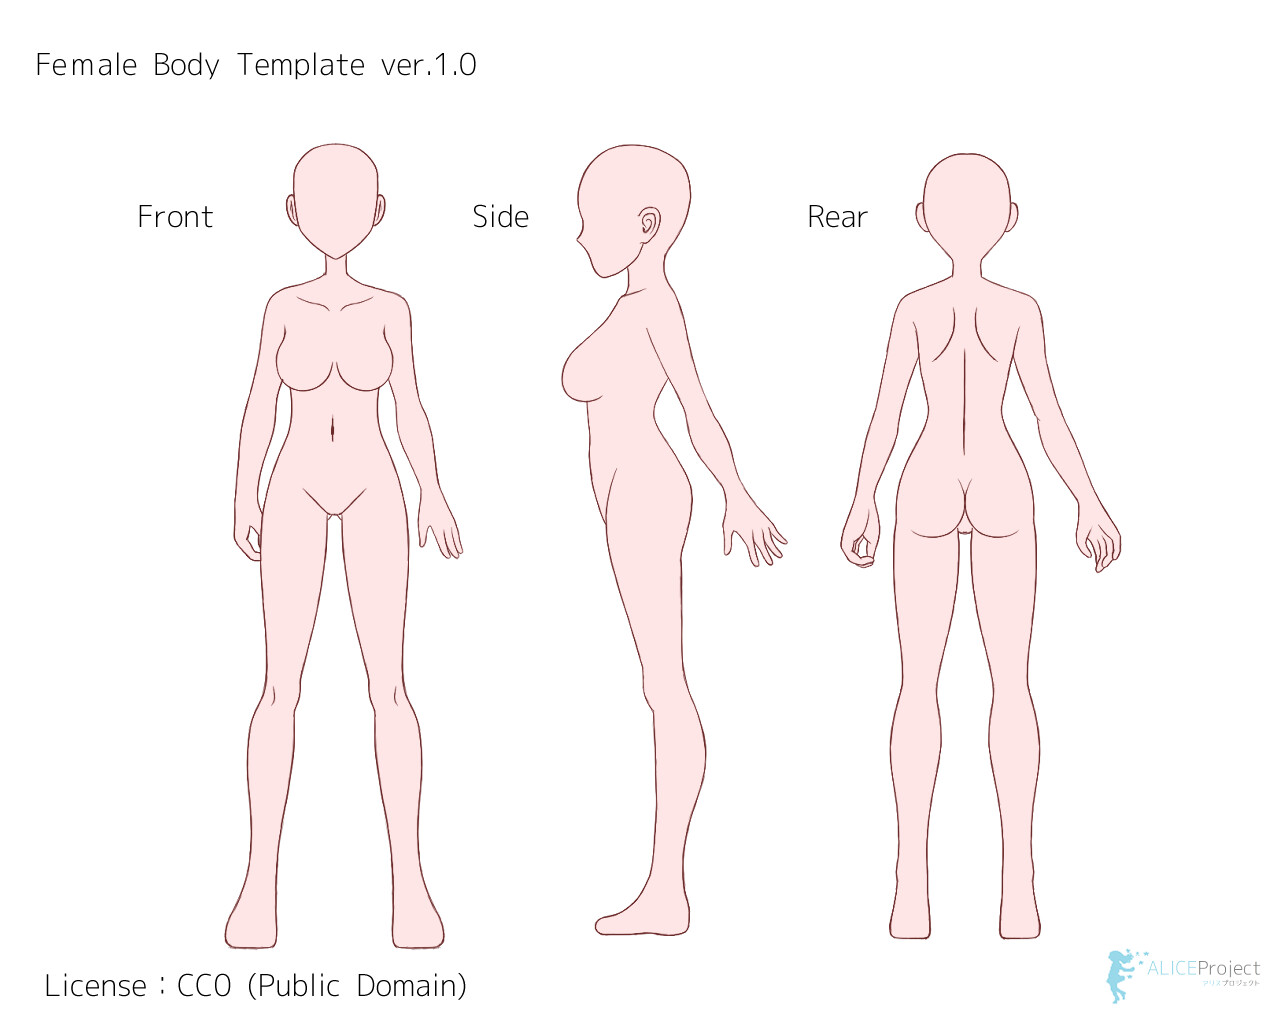 Differences between men and women's bodies in anime - Anime Art Magazine